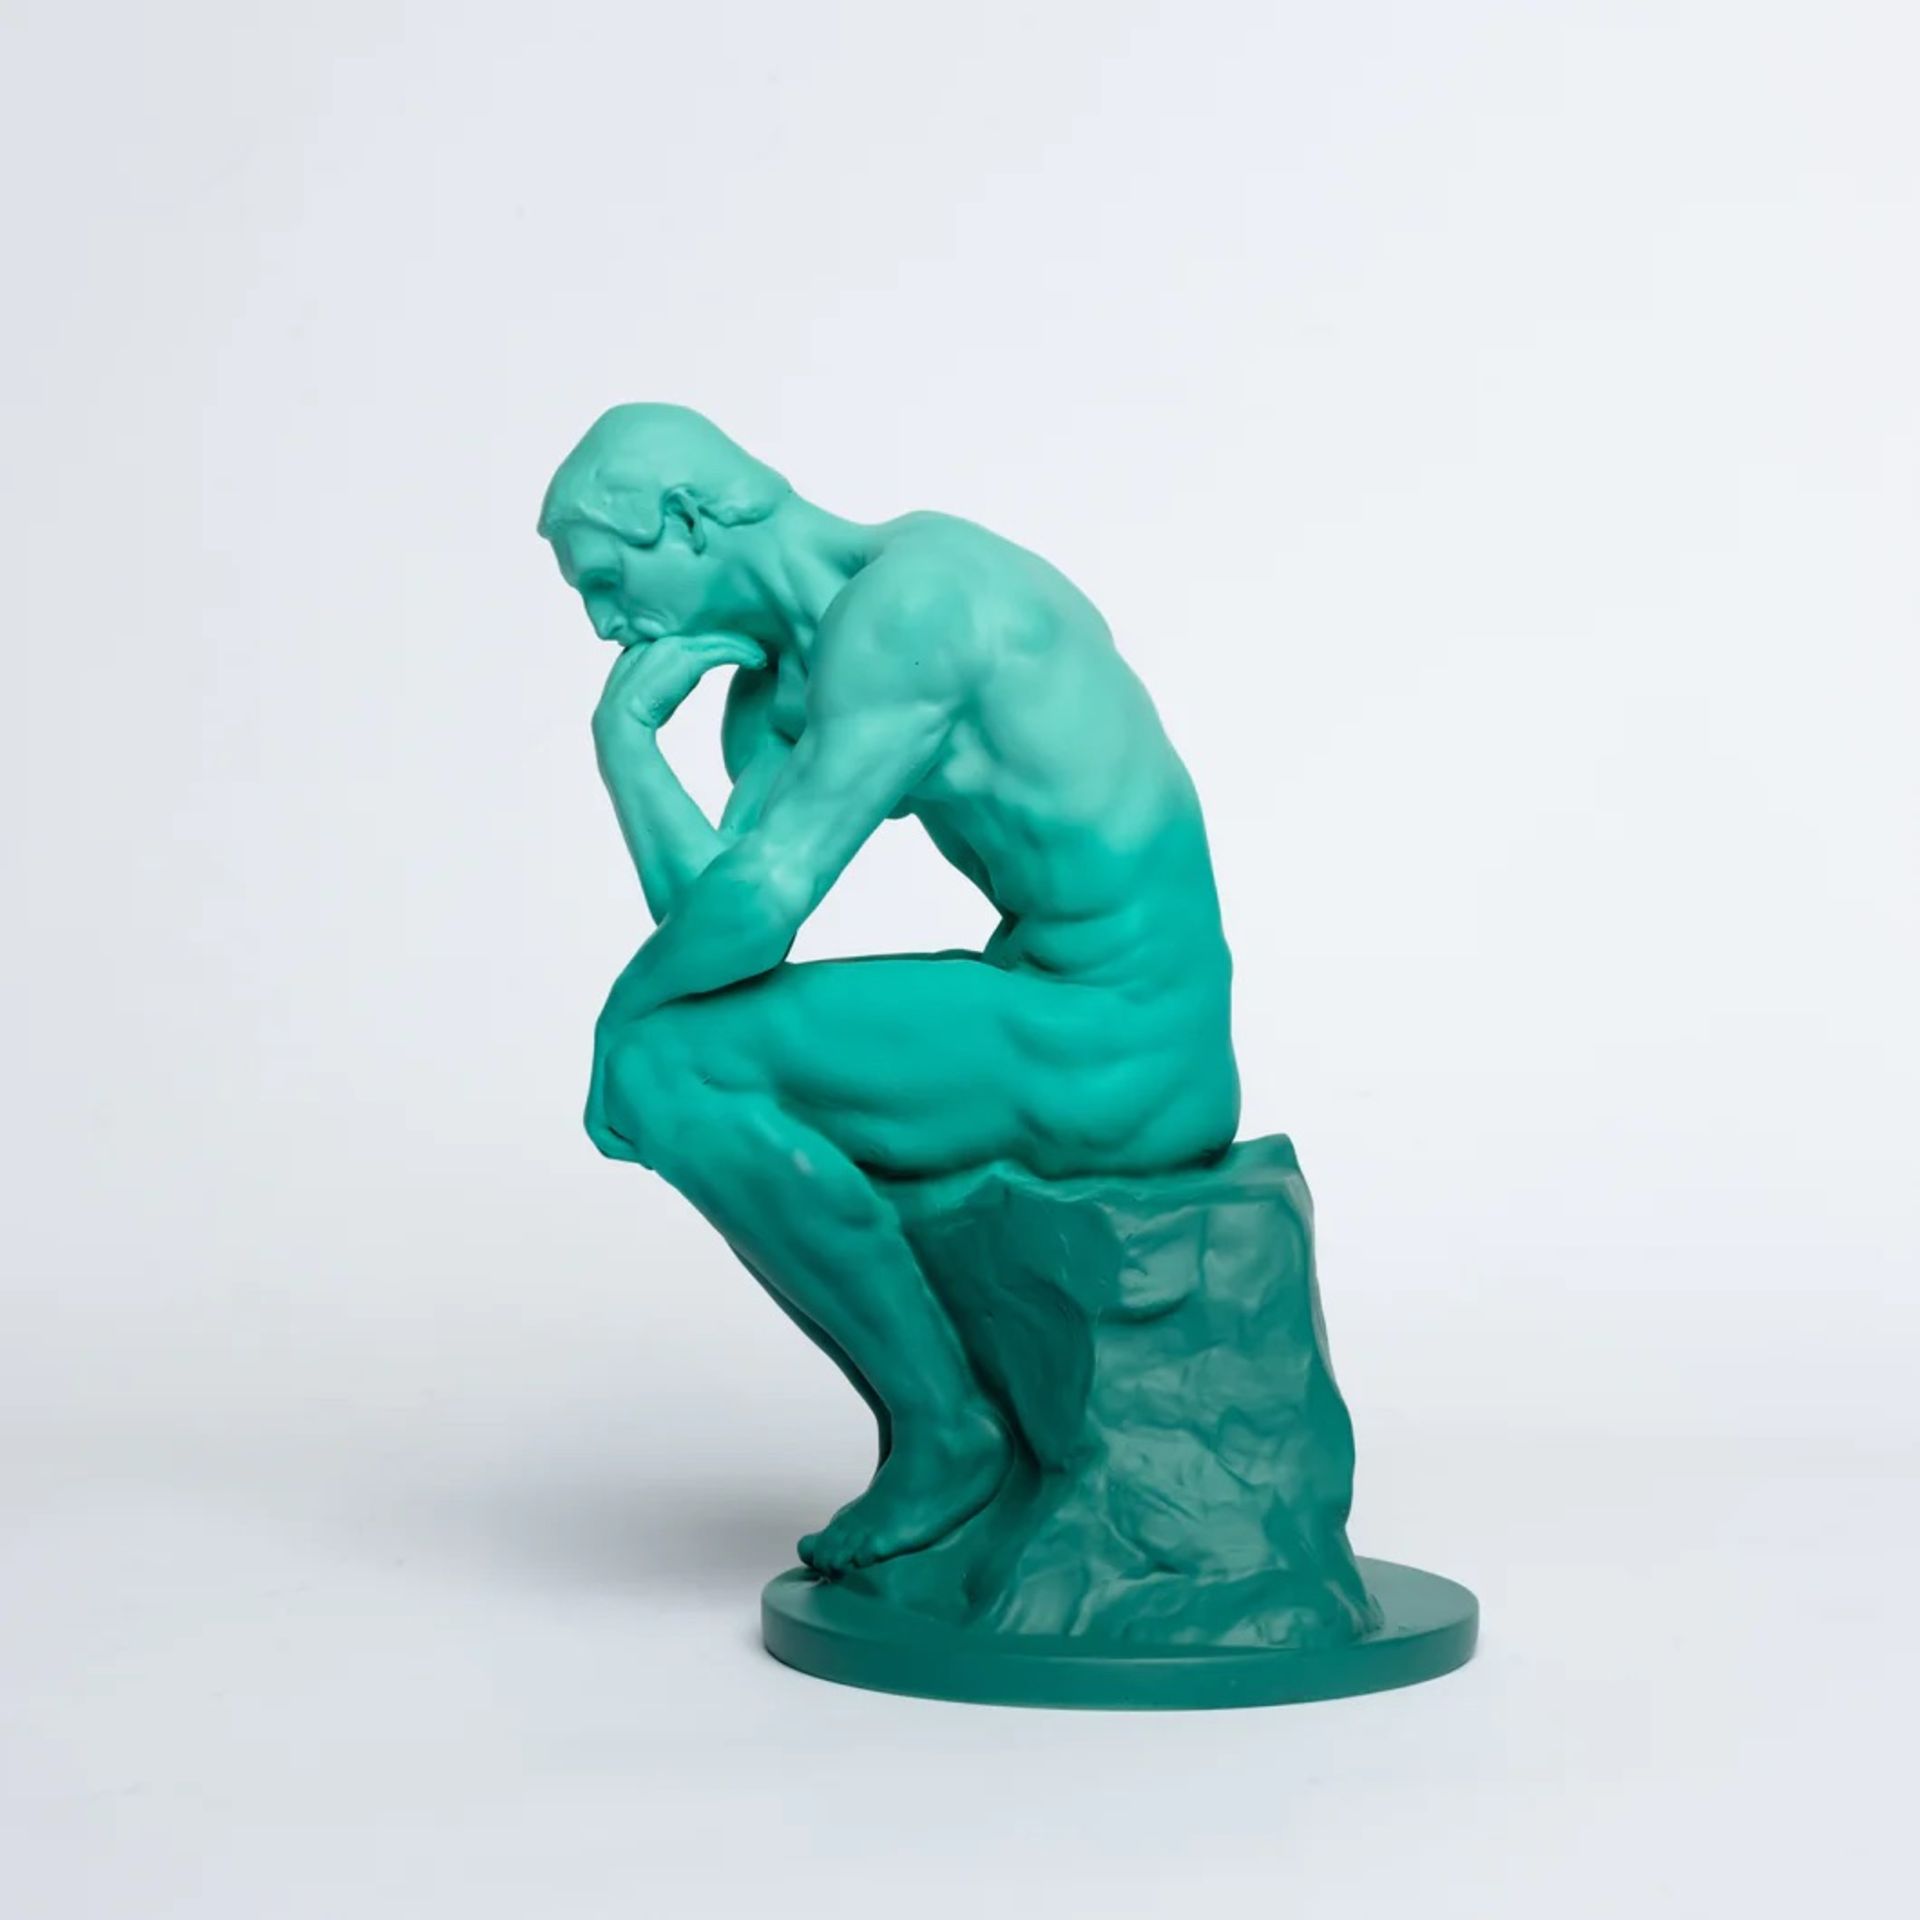 Auguste Rodin "The Thinker, 1904" Sculpture - Image 2 of 5